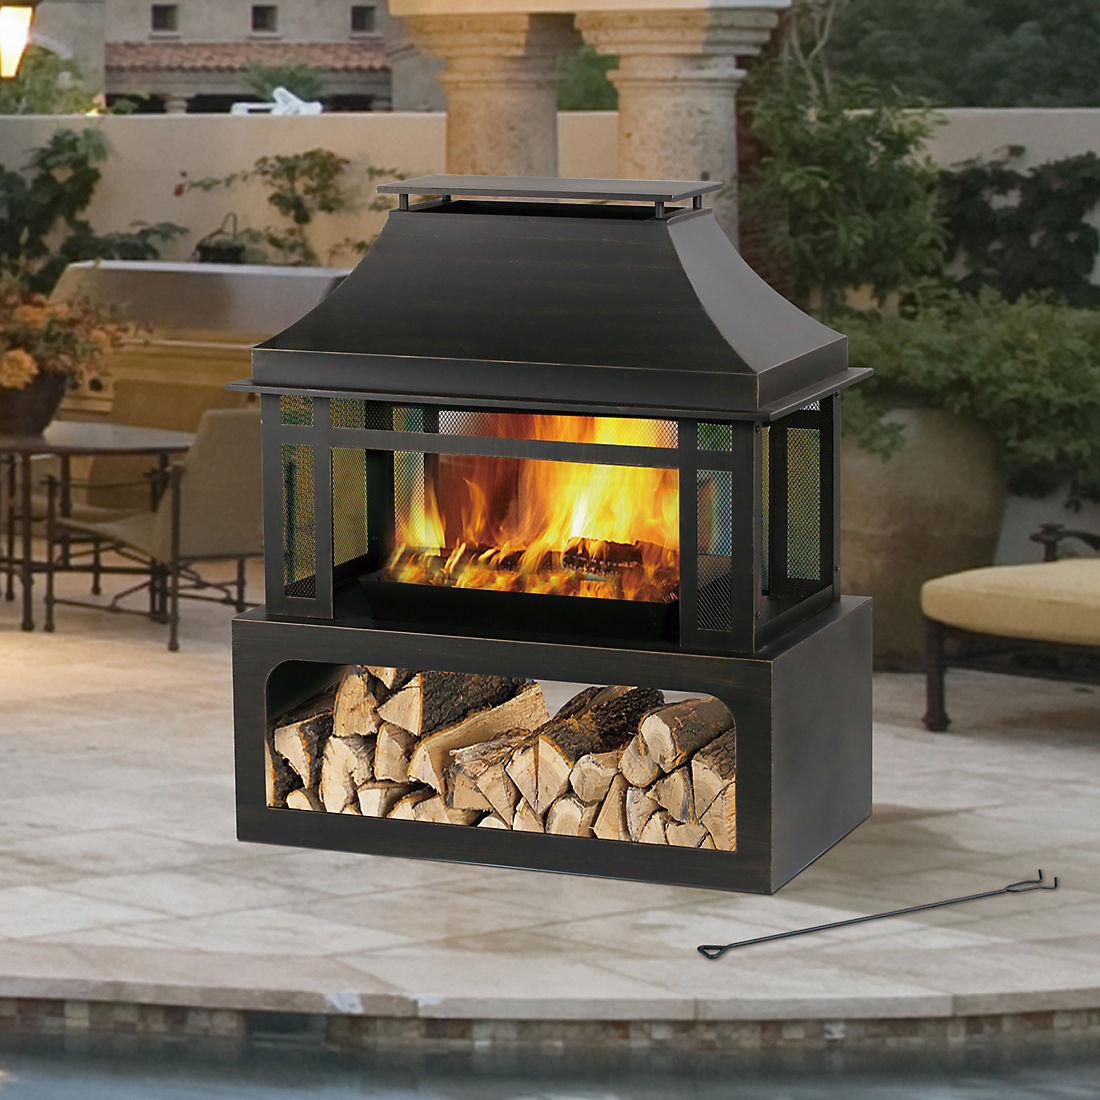 Perel Fire Bowl Black Outdoor Garden Patio Fireplace Pit Camping Burner Heater